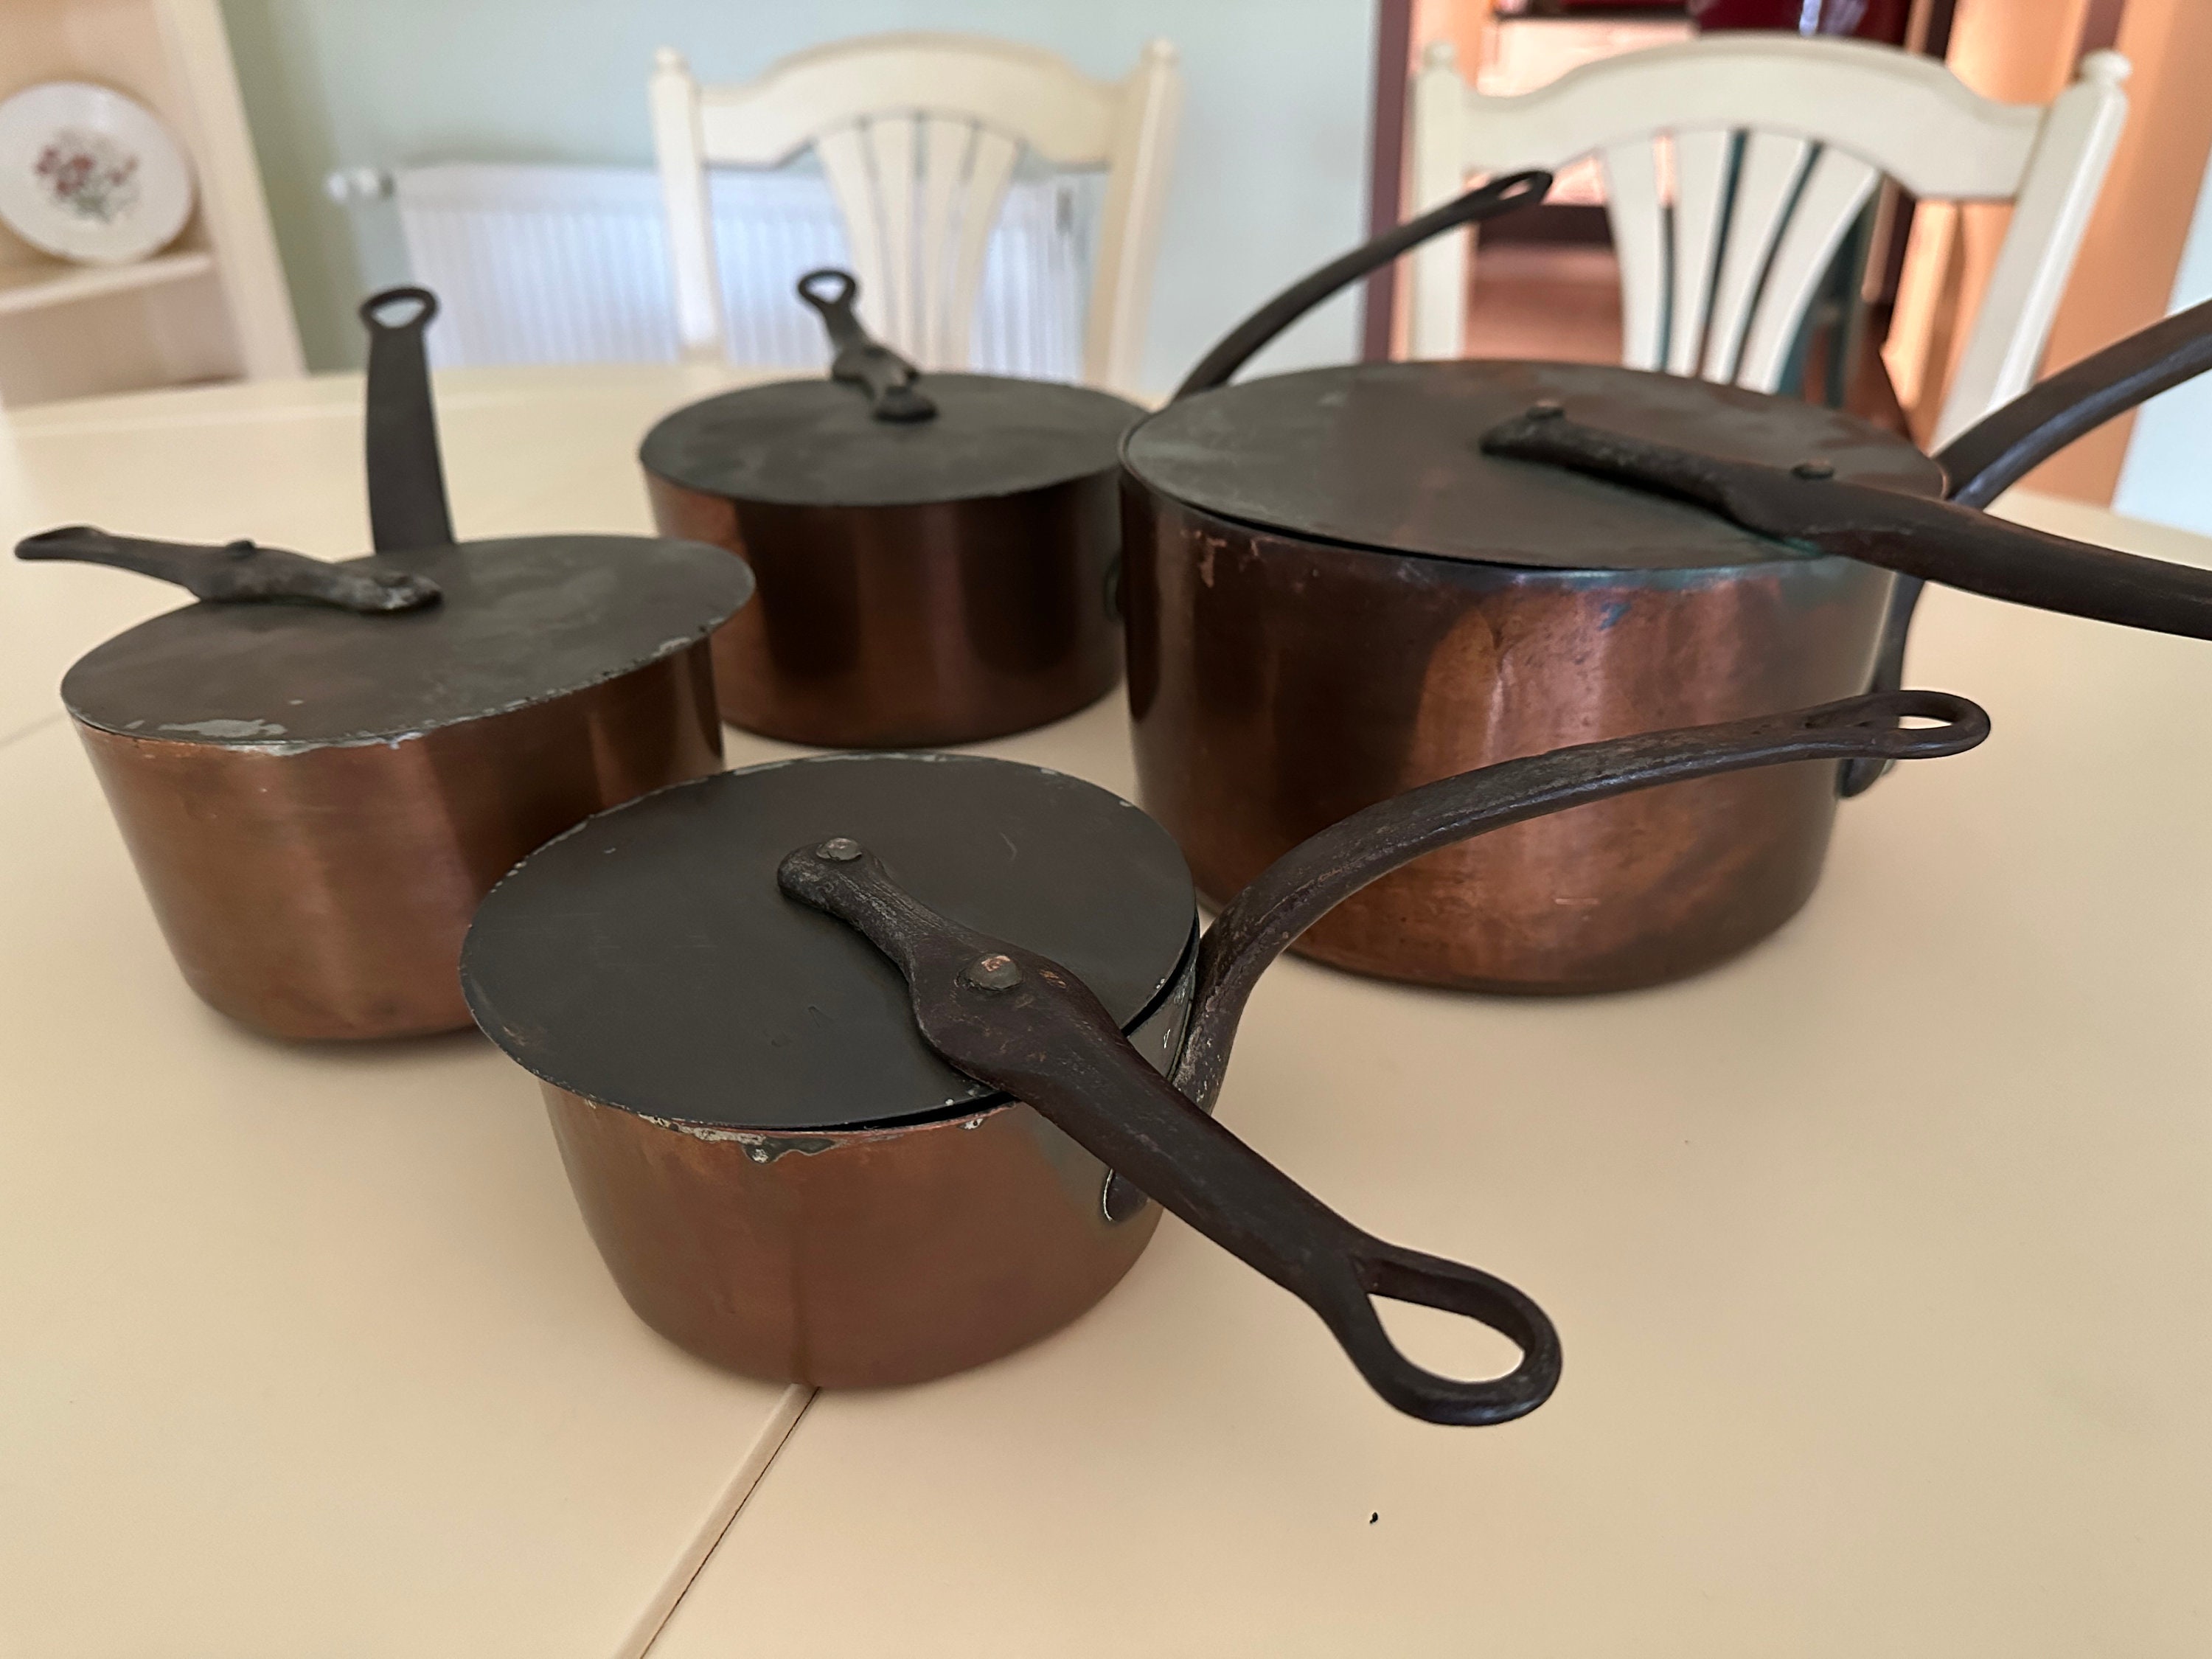 11 Inch Pizza Copper Flat Pan Copper or Copper Skillet and Brass Hangable  Copper Kitchen Decor Pan Set With Brass Handle Unique Pan 